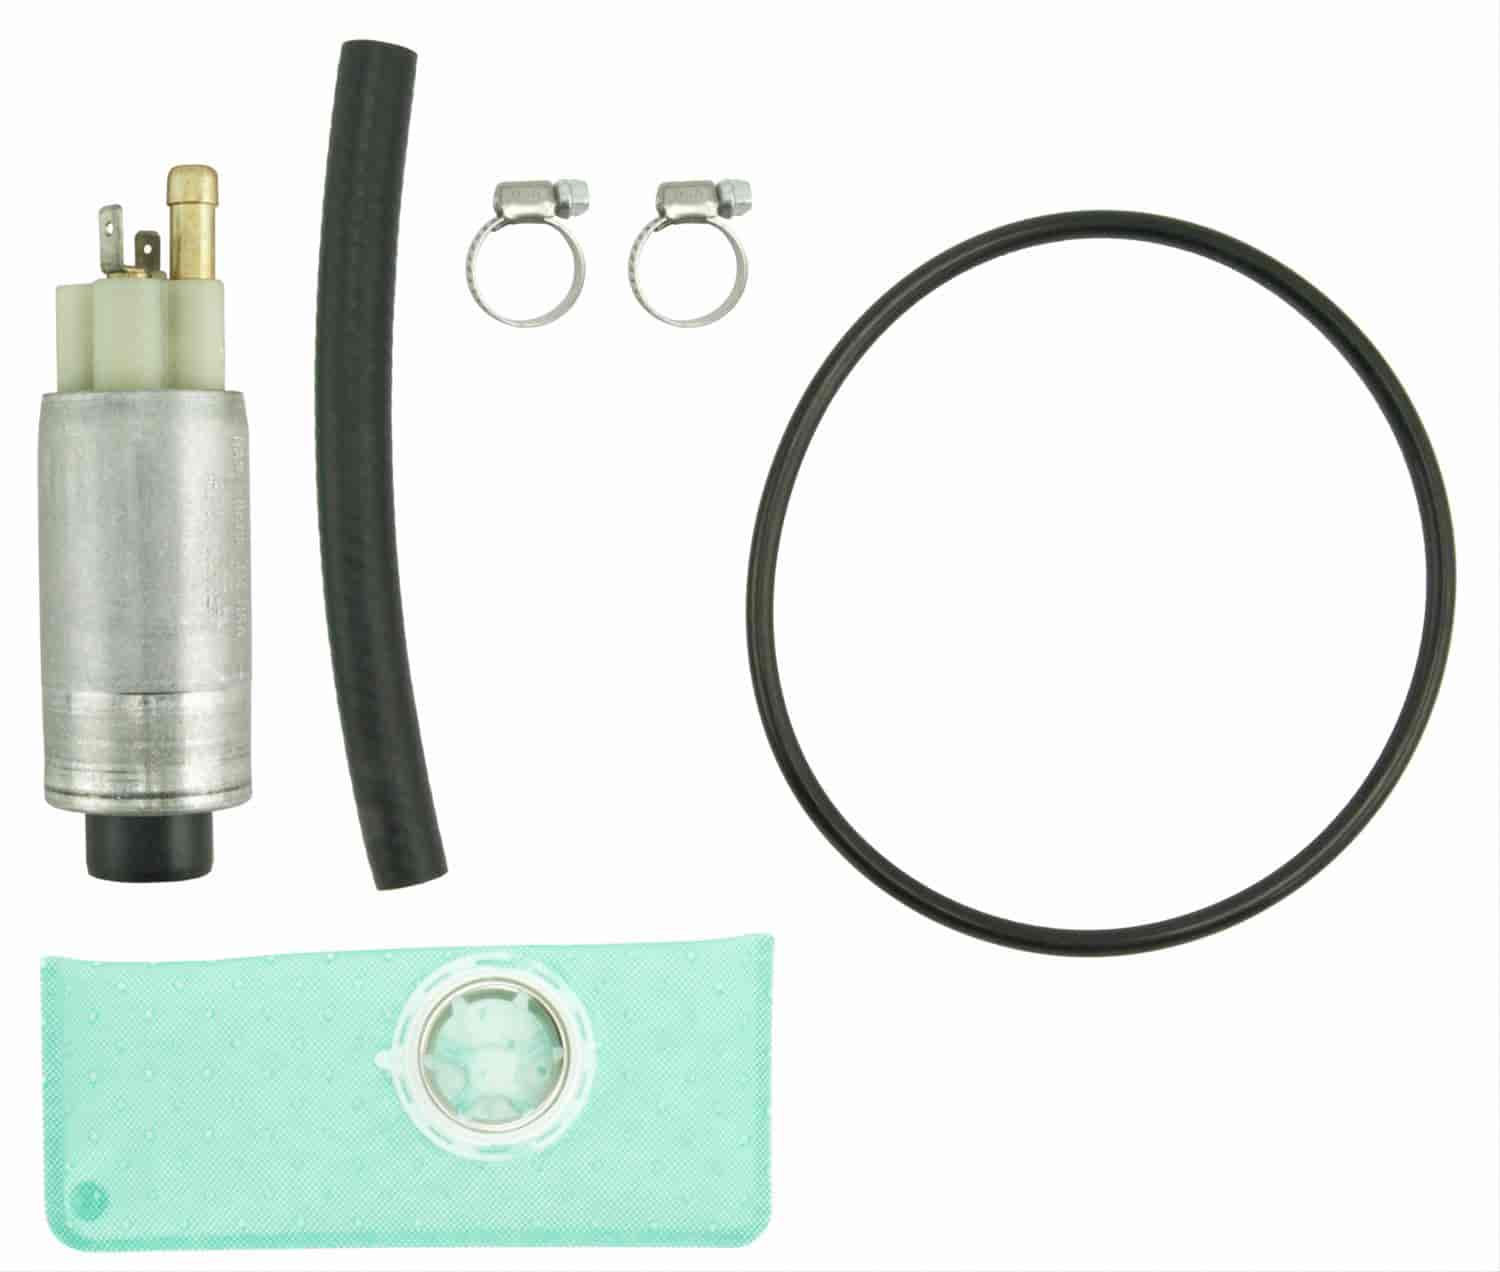 EFI In-Tank Electric Fuel Pump And Strainer Set for 1987-1990 Ford Mustang/1988-1990 Ford Tempo/Mercury Topaz